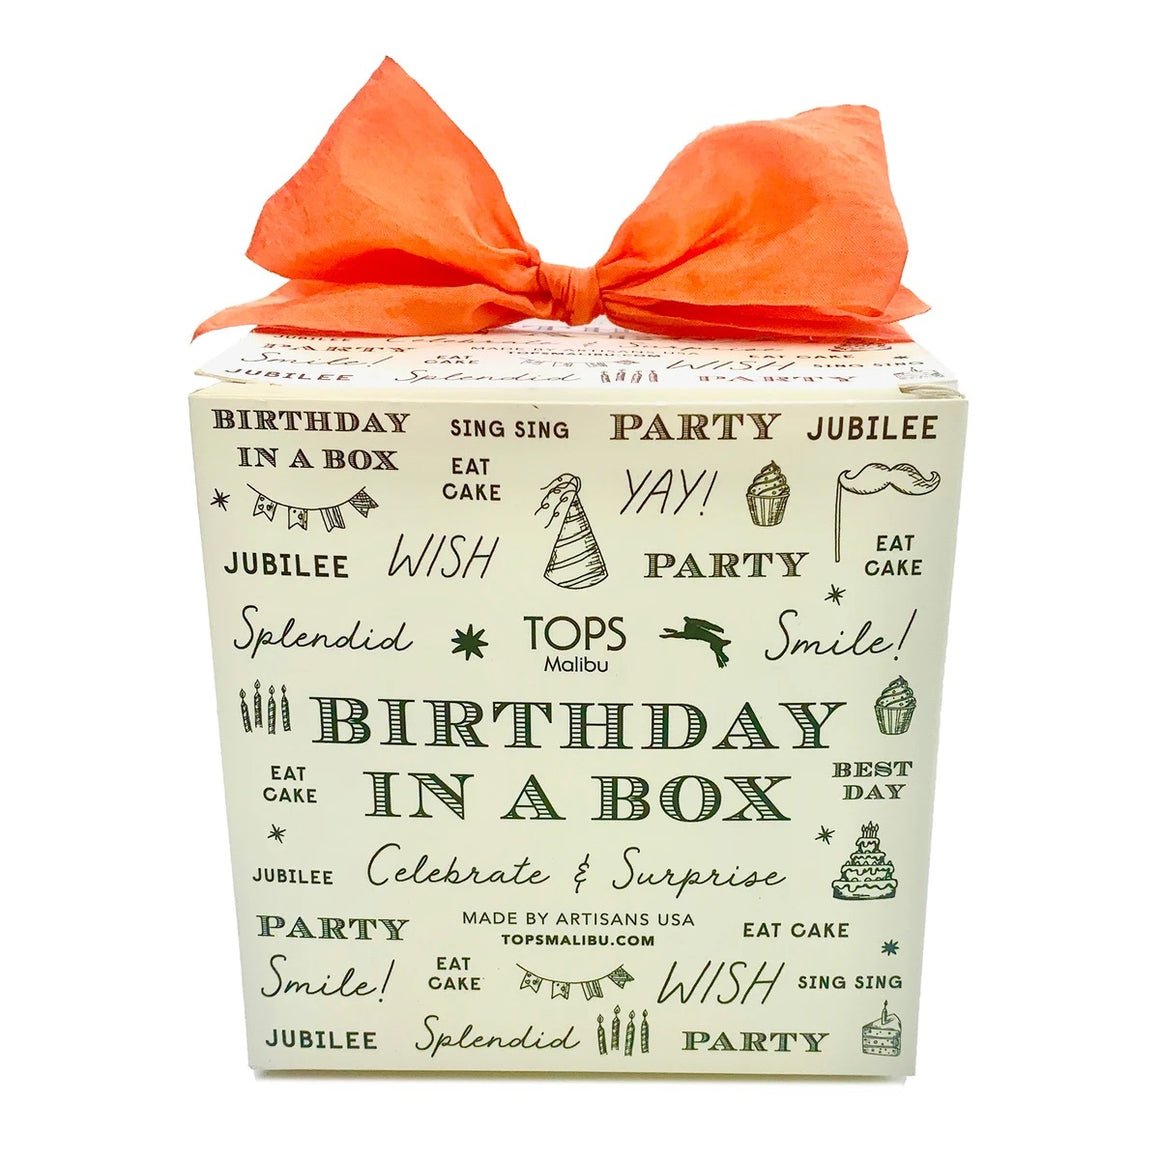 GIFTS - DELUXE BIRTHDAY IN A BOX